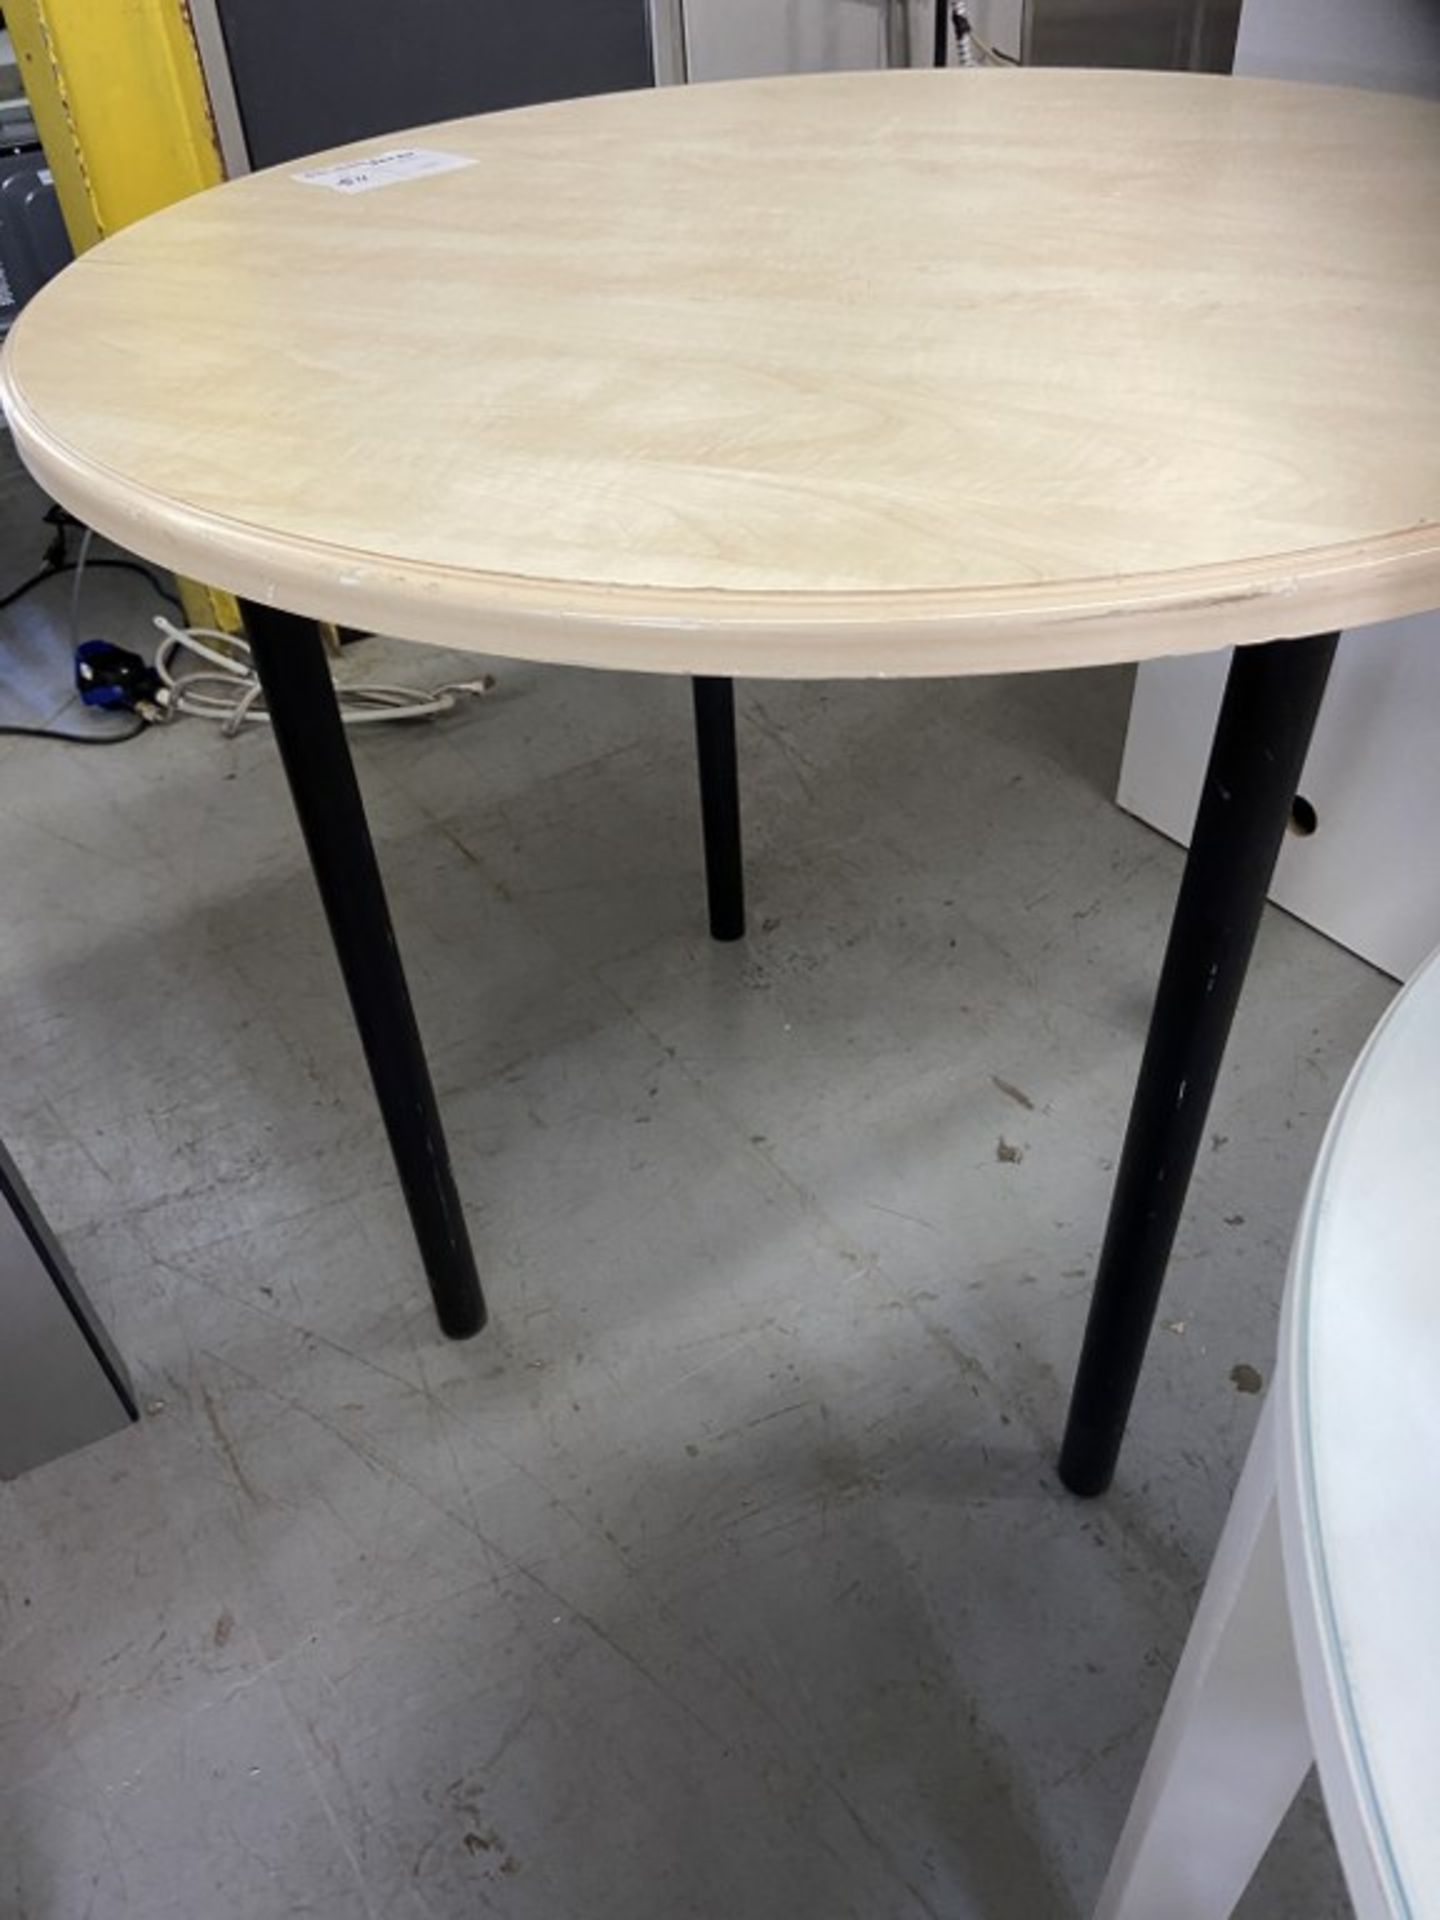 30" ROUND TABLE W/WOOD TOP - Image 2 of 2